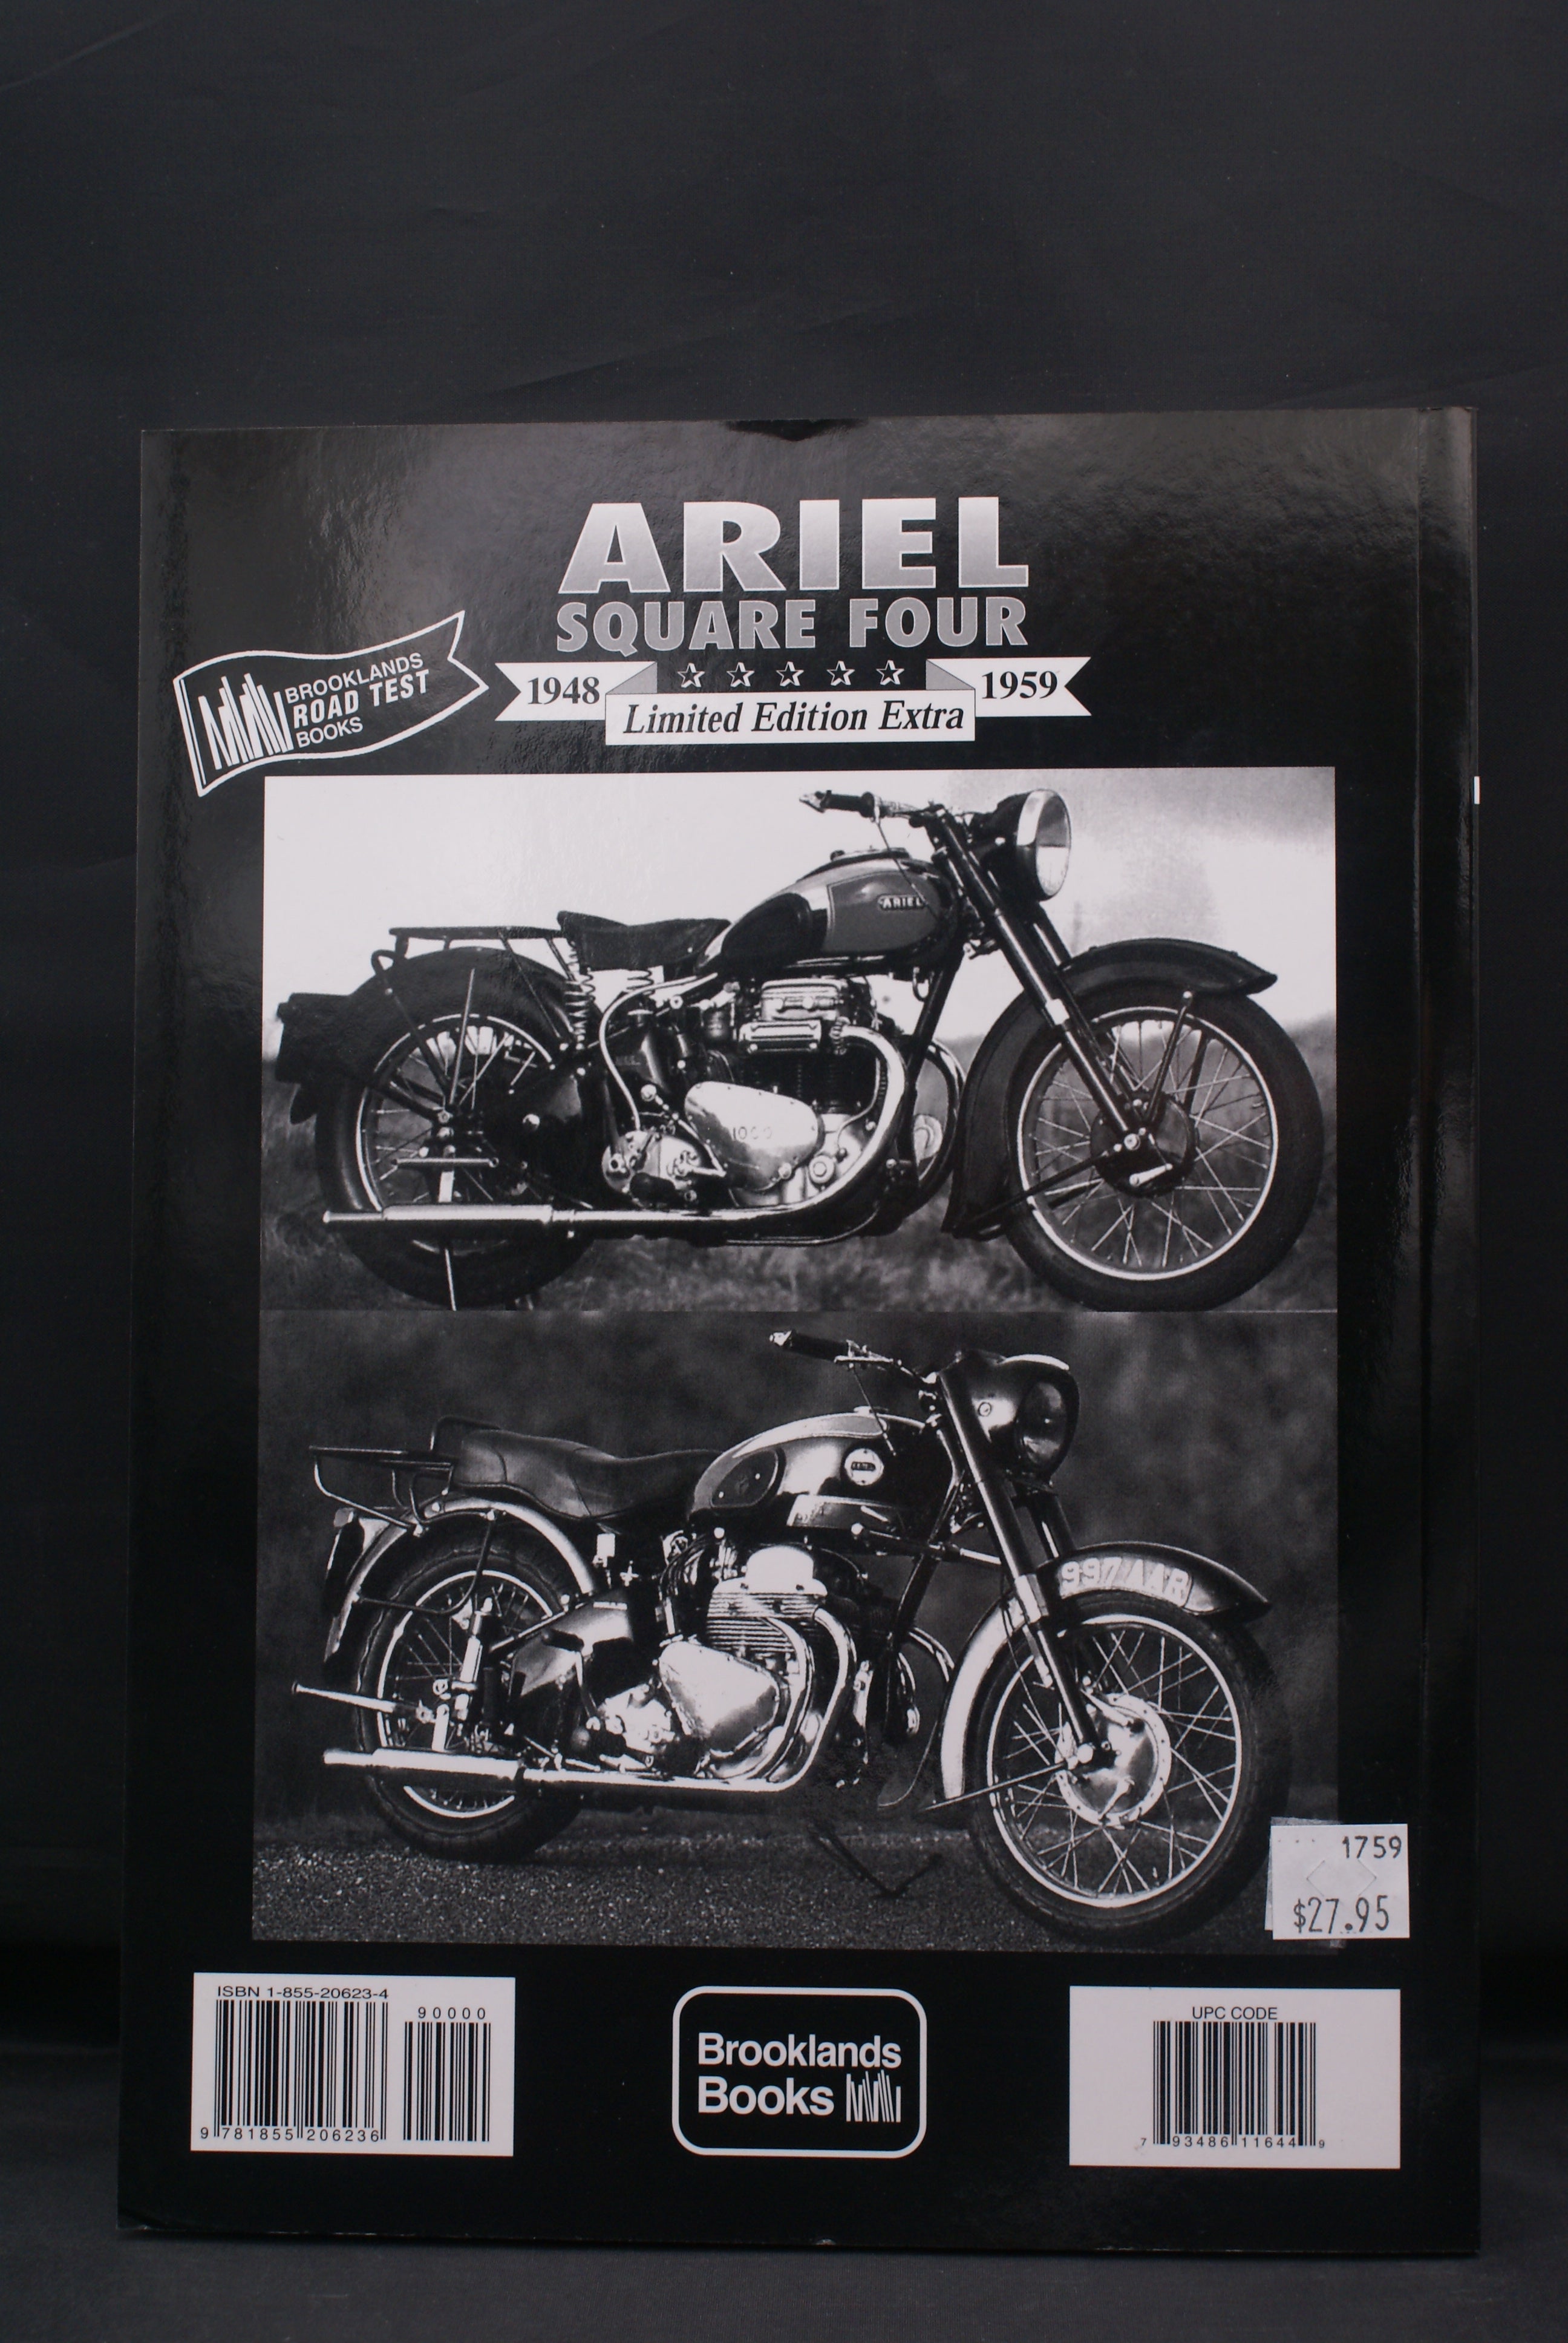 Ariel, Square Four, Limited Edition Extra